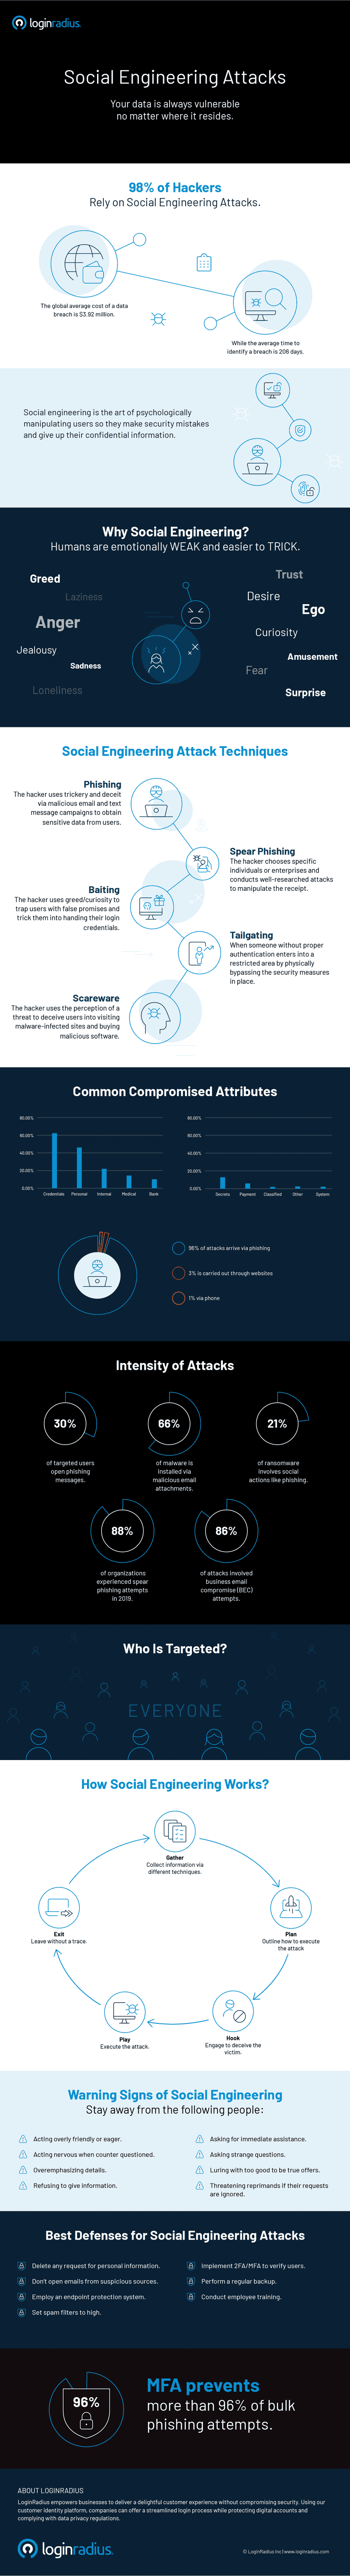 Social-Engineering-Attacks-infographic